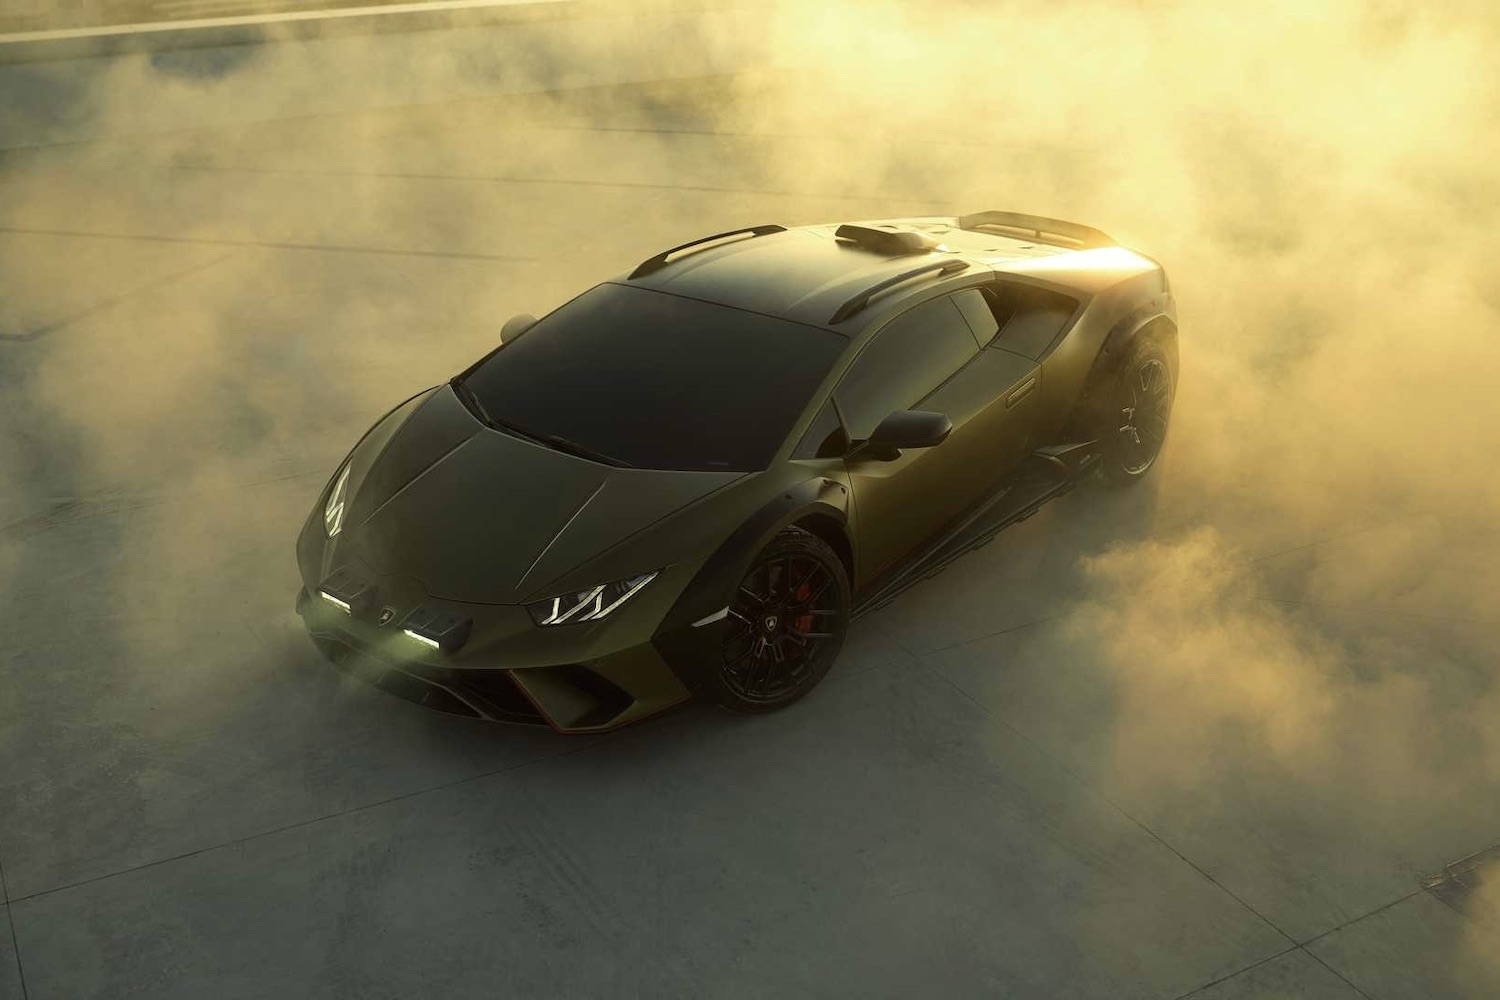 Front end angle of 2023 Lamborghini Huracan with smoke in the back on a rooftop during sunset.